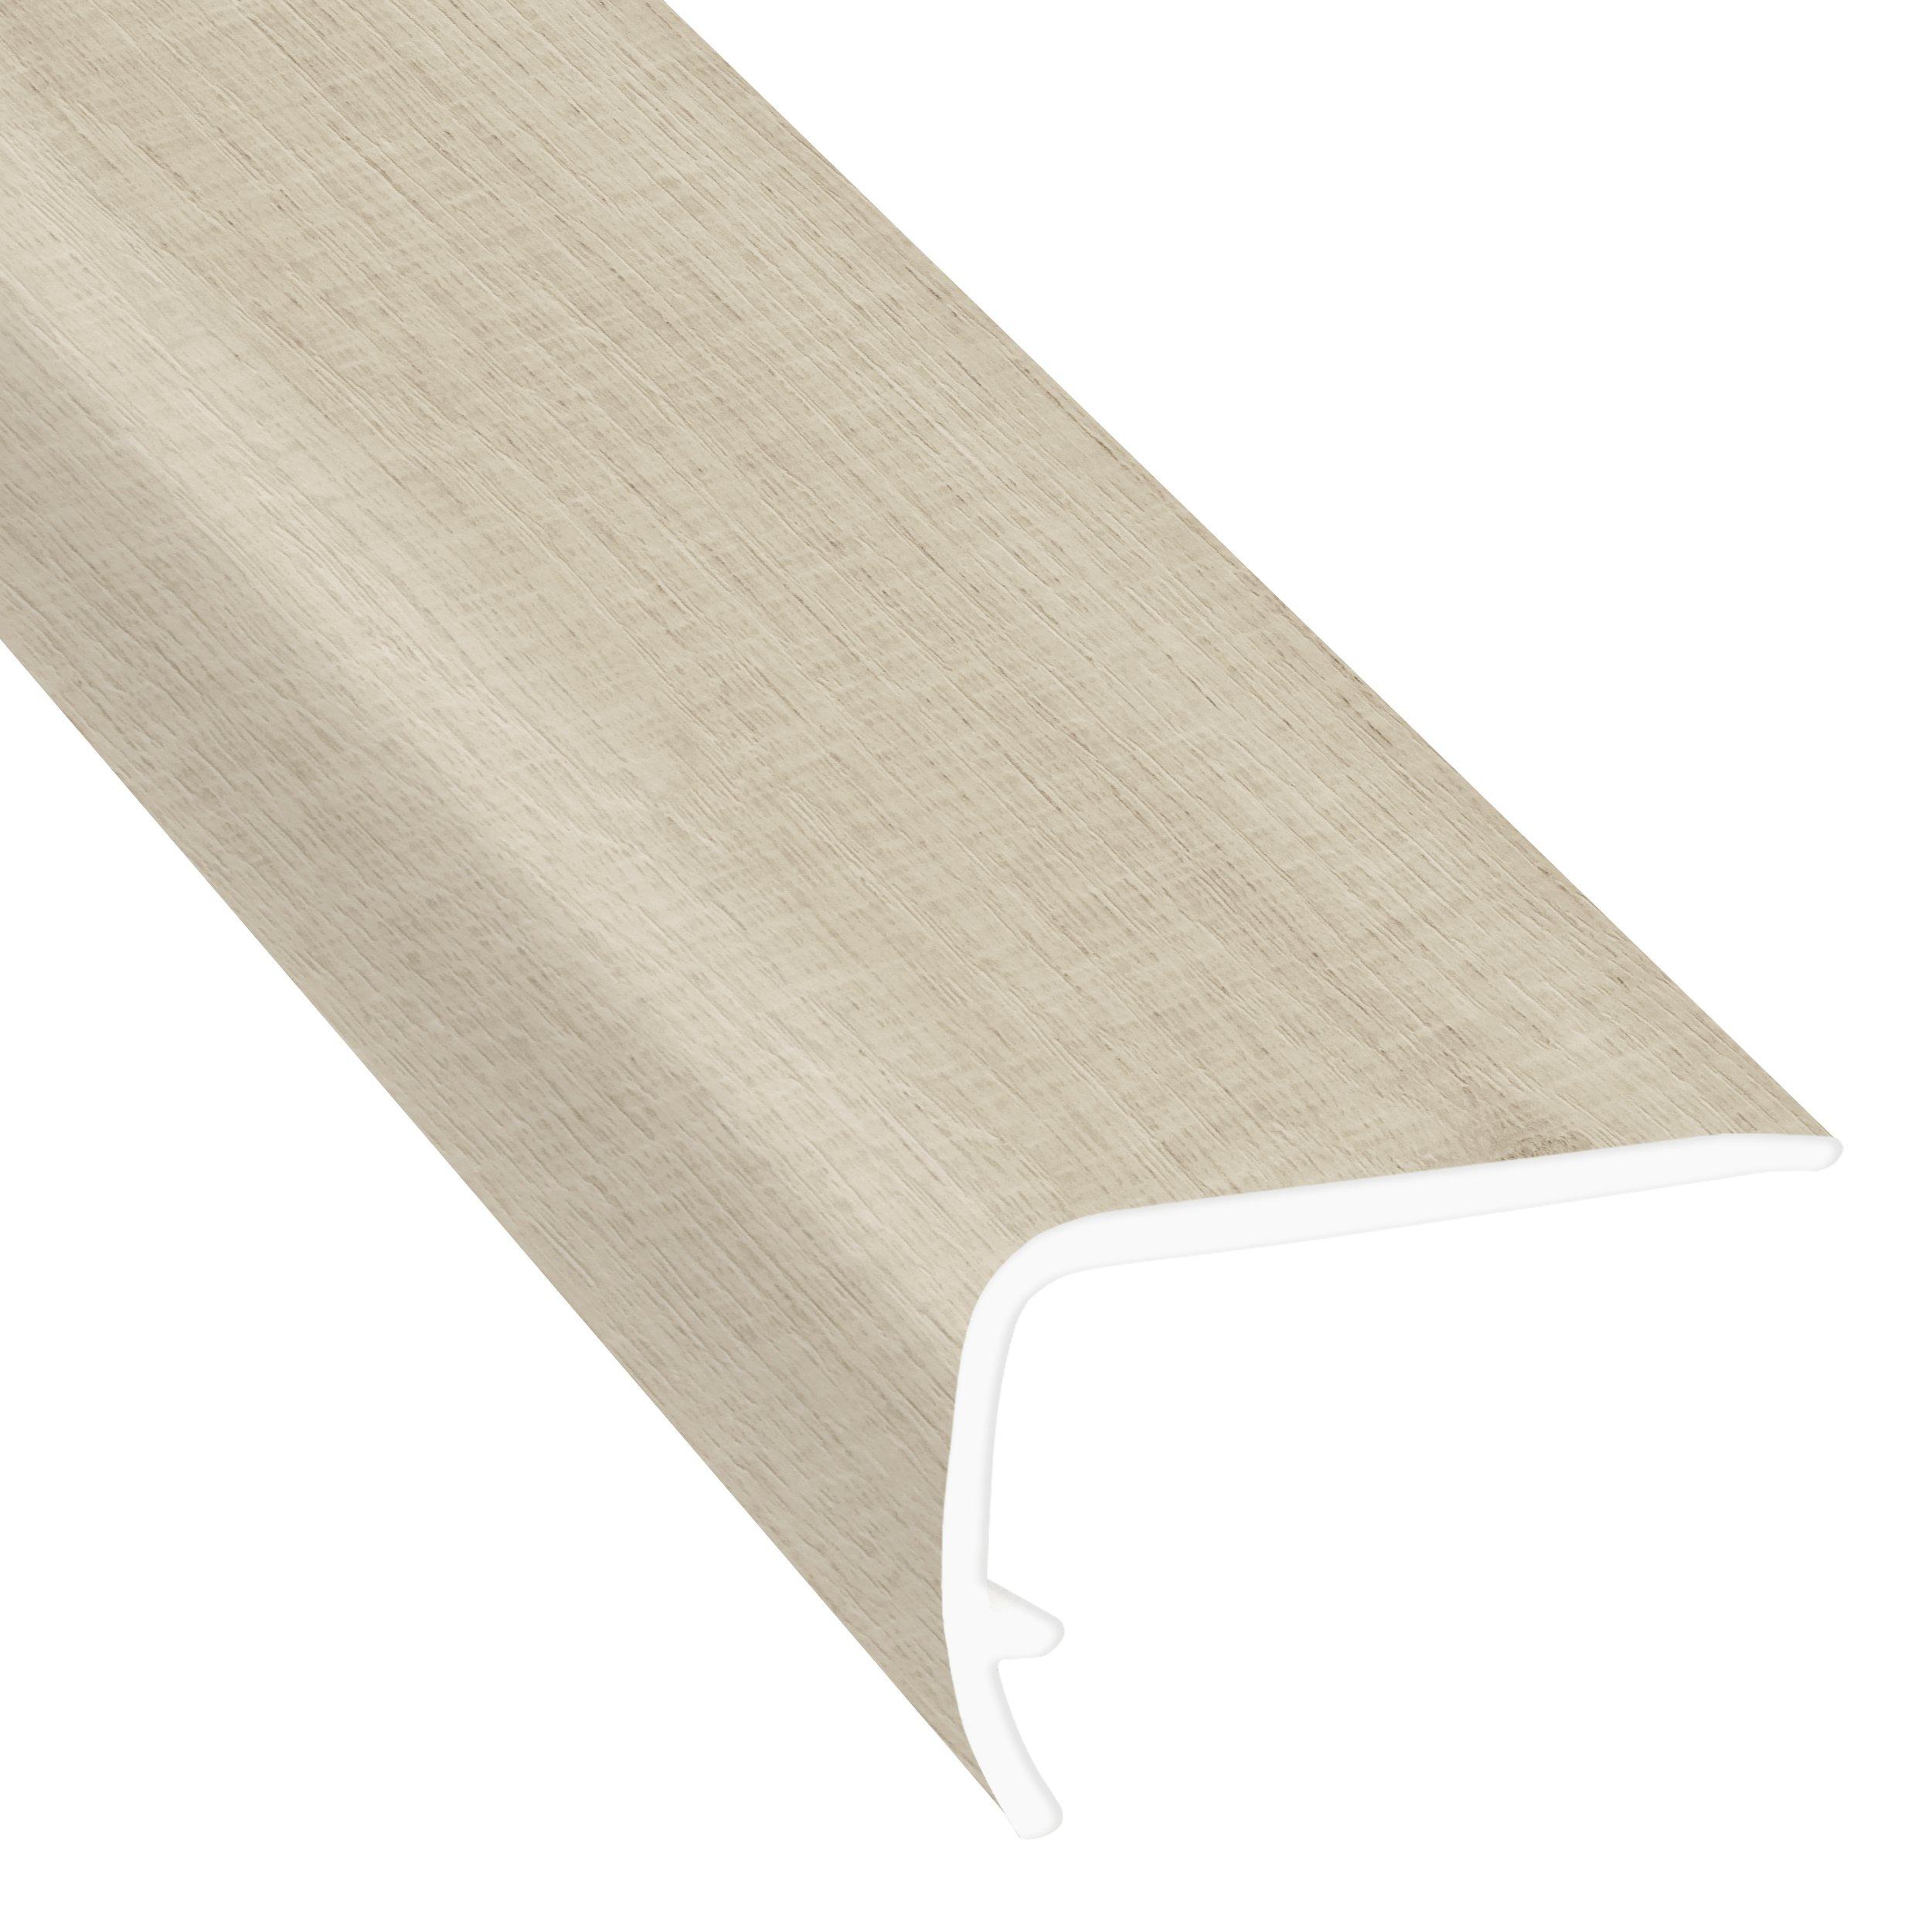 Wrightsville Almond 94in. Vinyl Overlapping Stair Nose